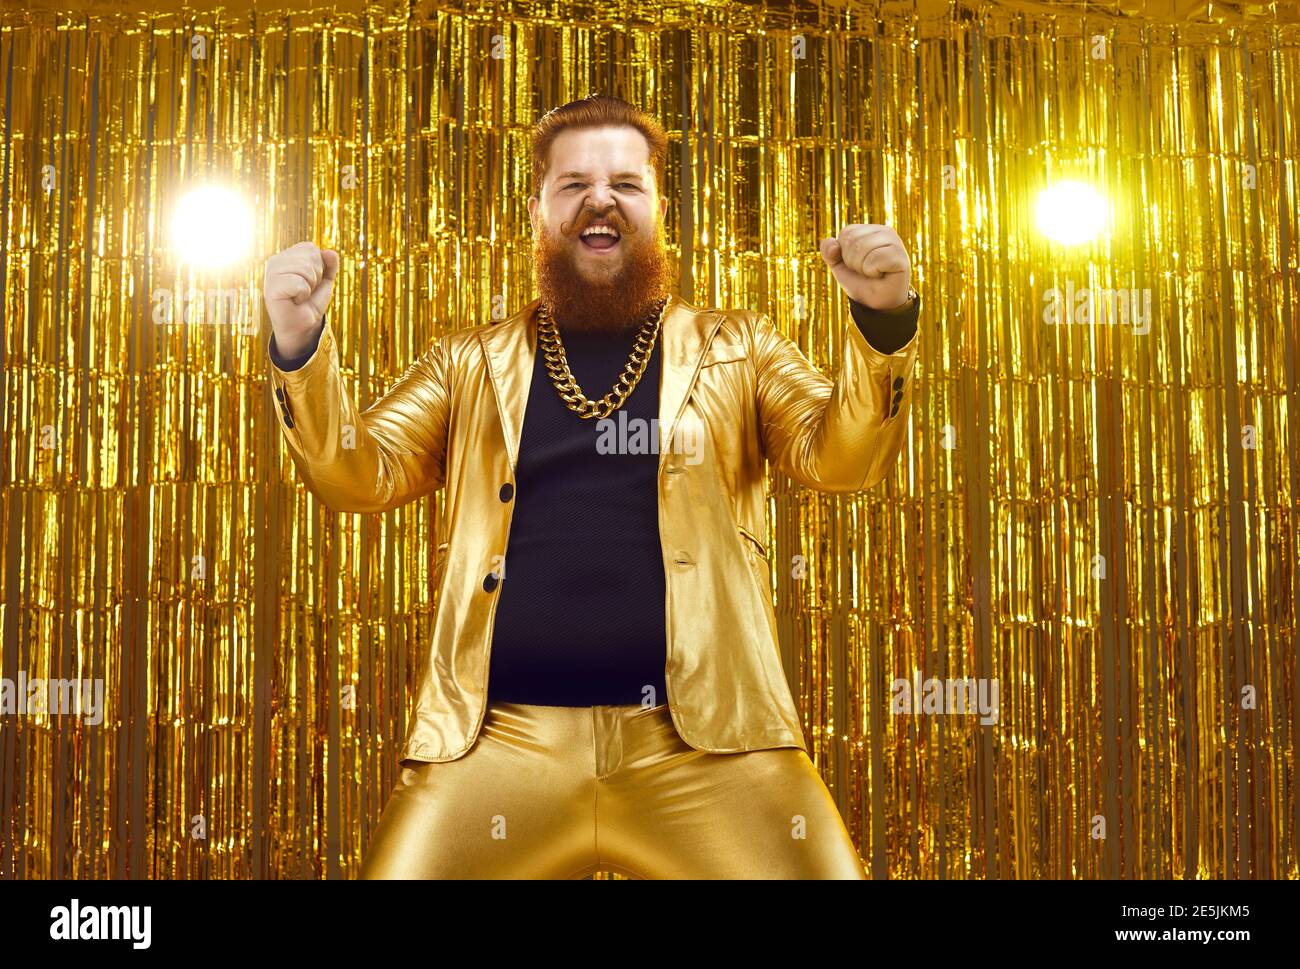 Funny chubby man in funky suit and gold chain dancing and celebrating his success Stock Photo